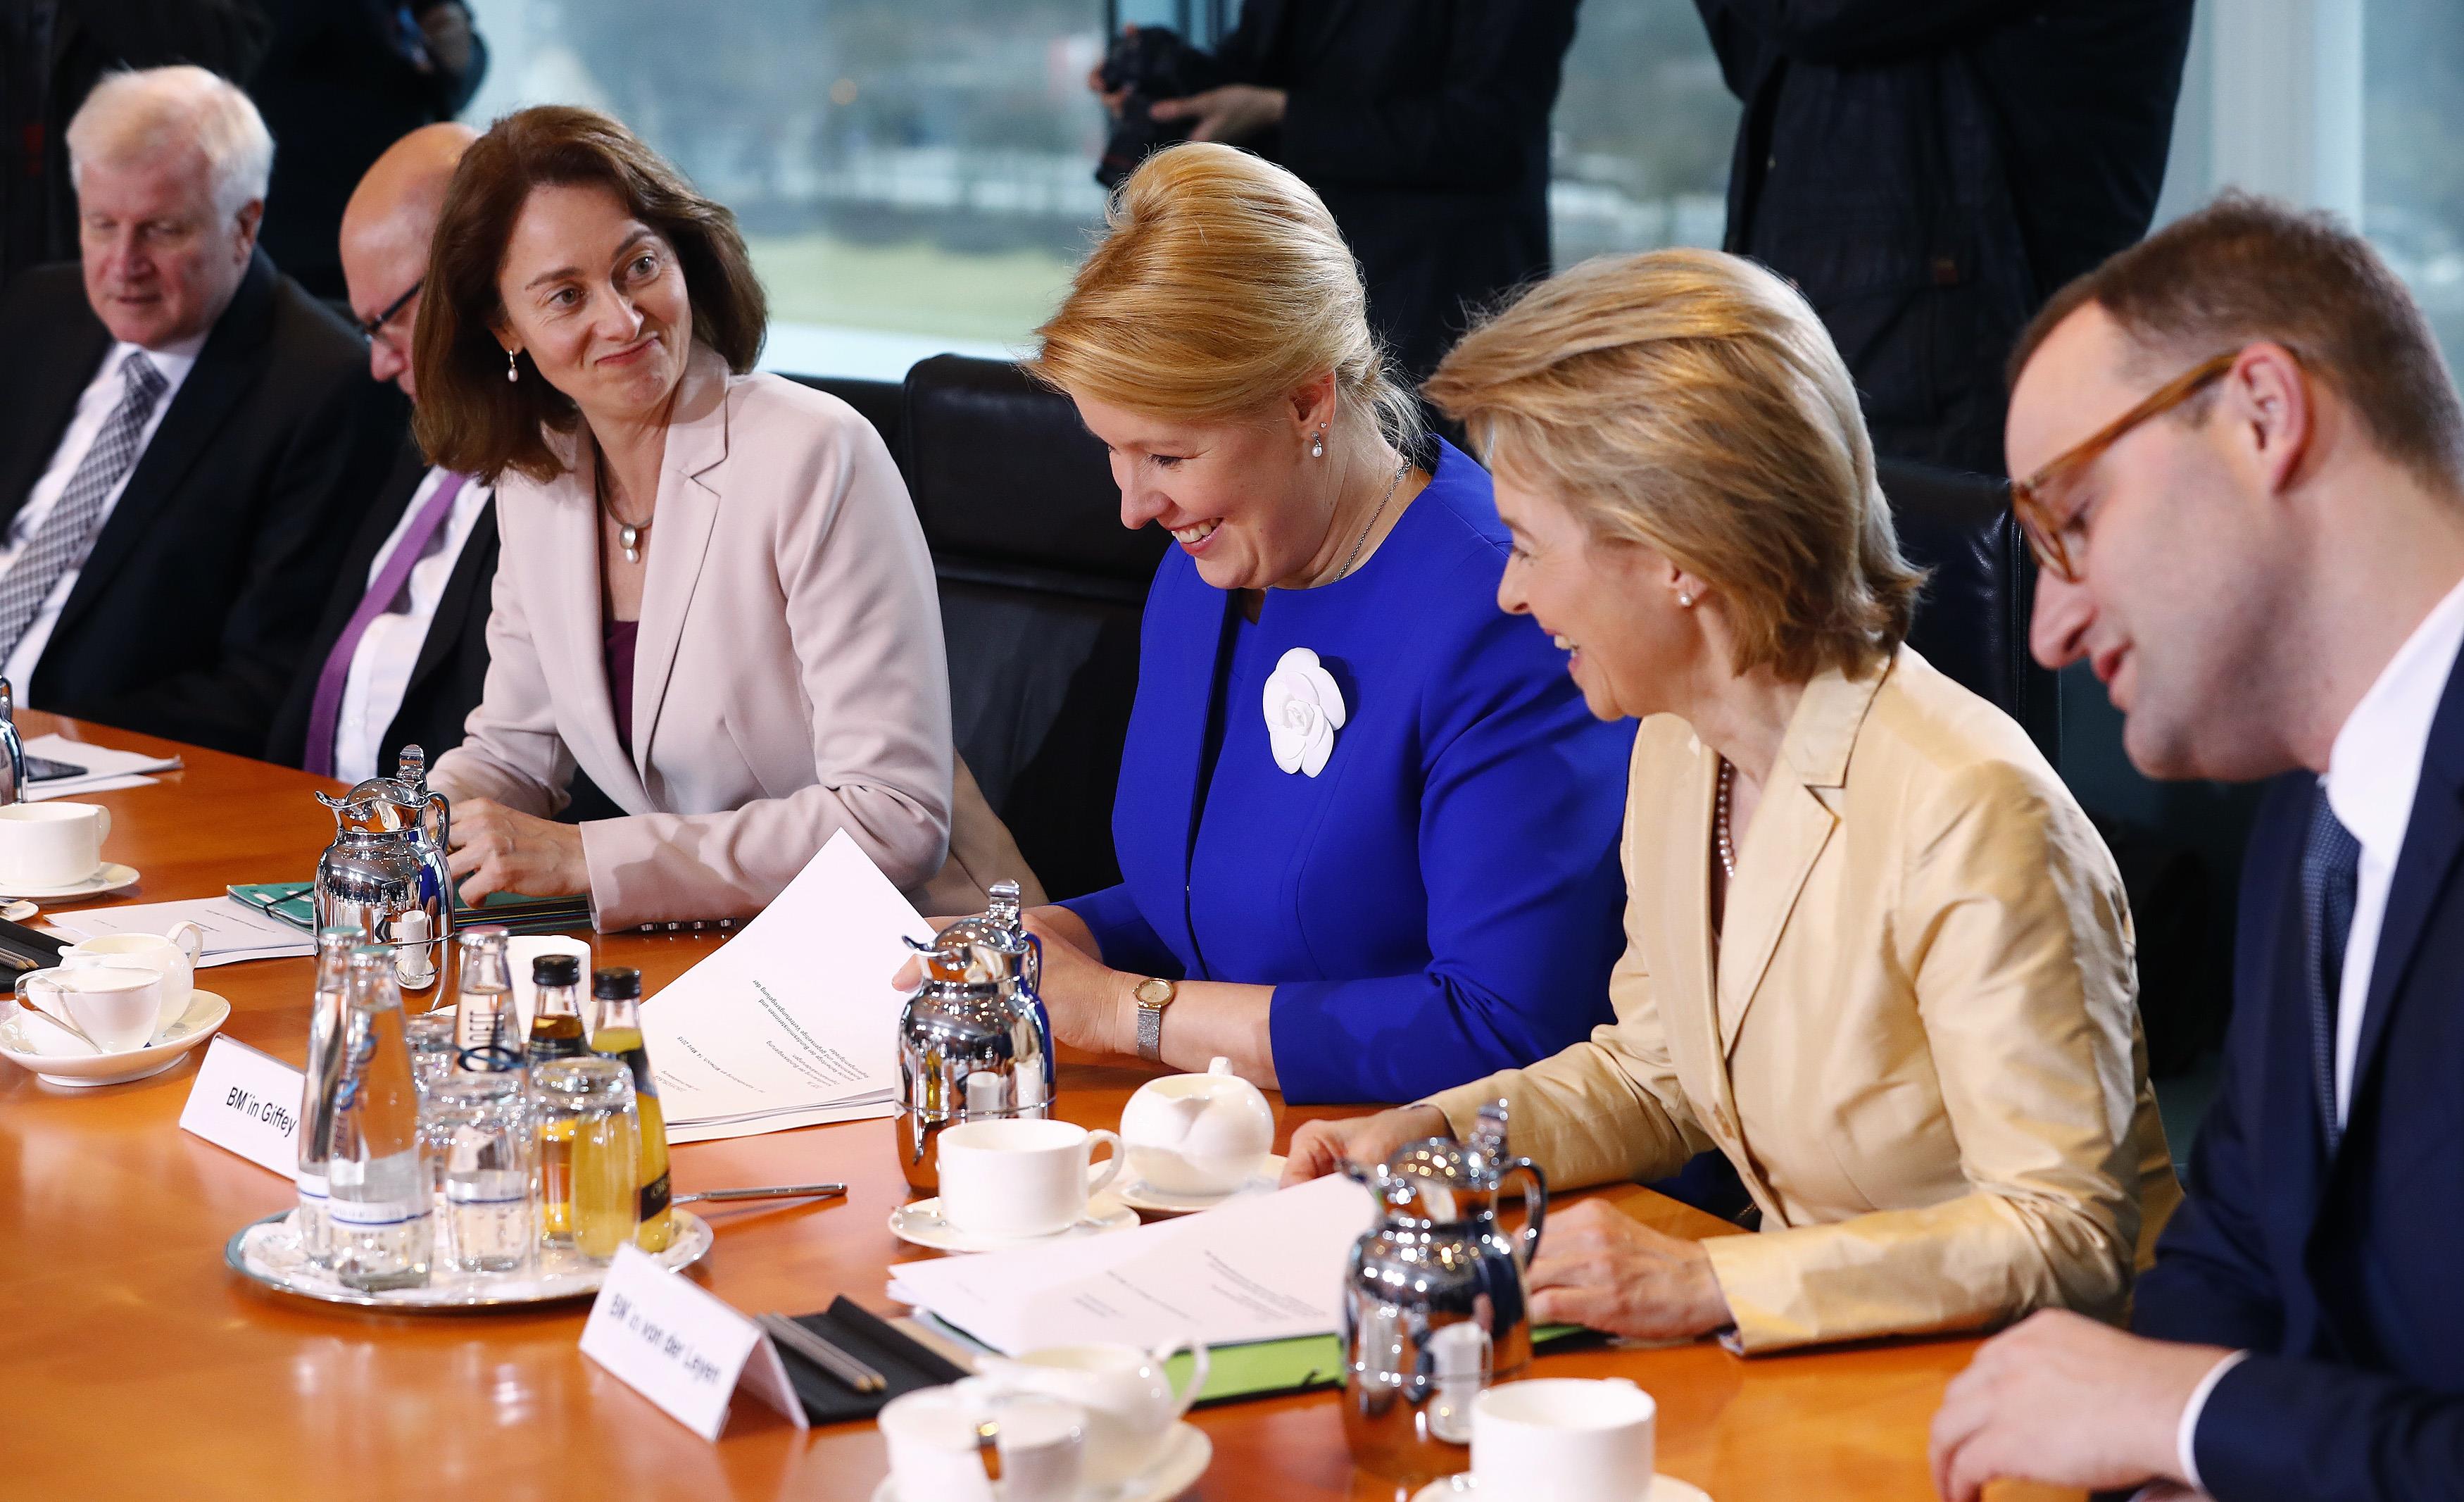 Germany's Justice Minister Katarina Barley (third from left) attends the first cabinet meeting in Berlin, Germany, March 14, 2018 (by REUTERS / Fabrizio Bensch)